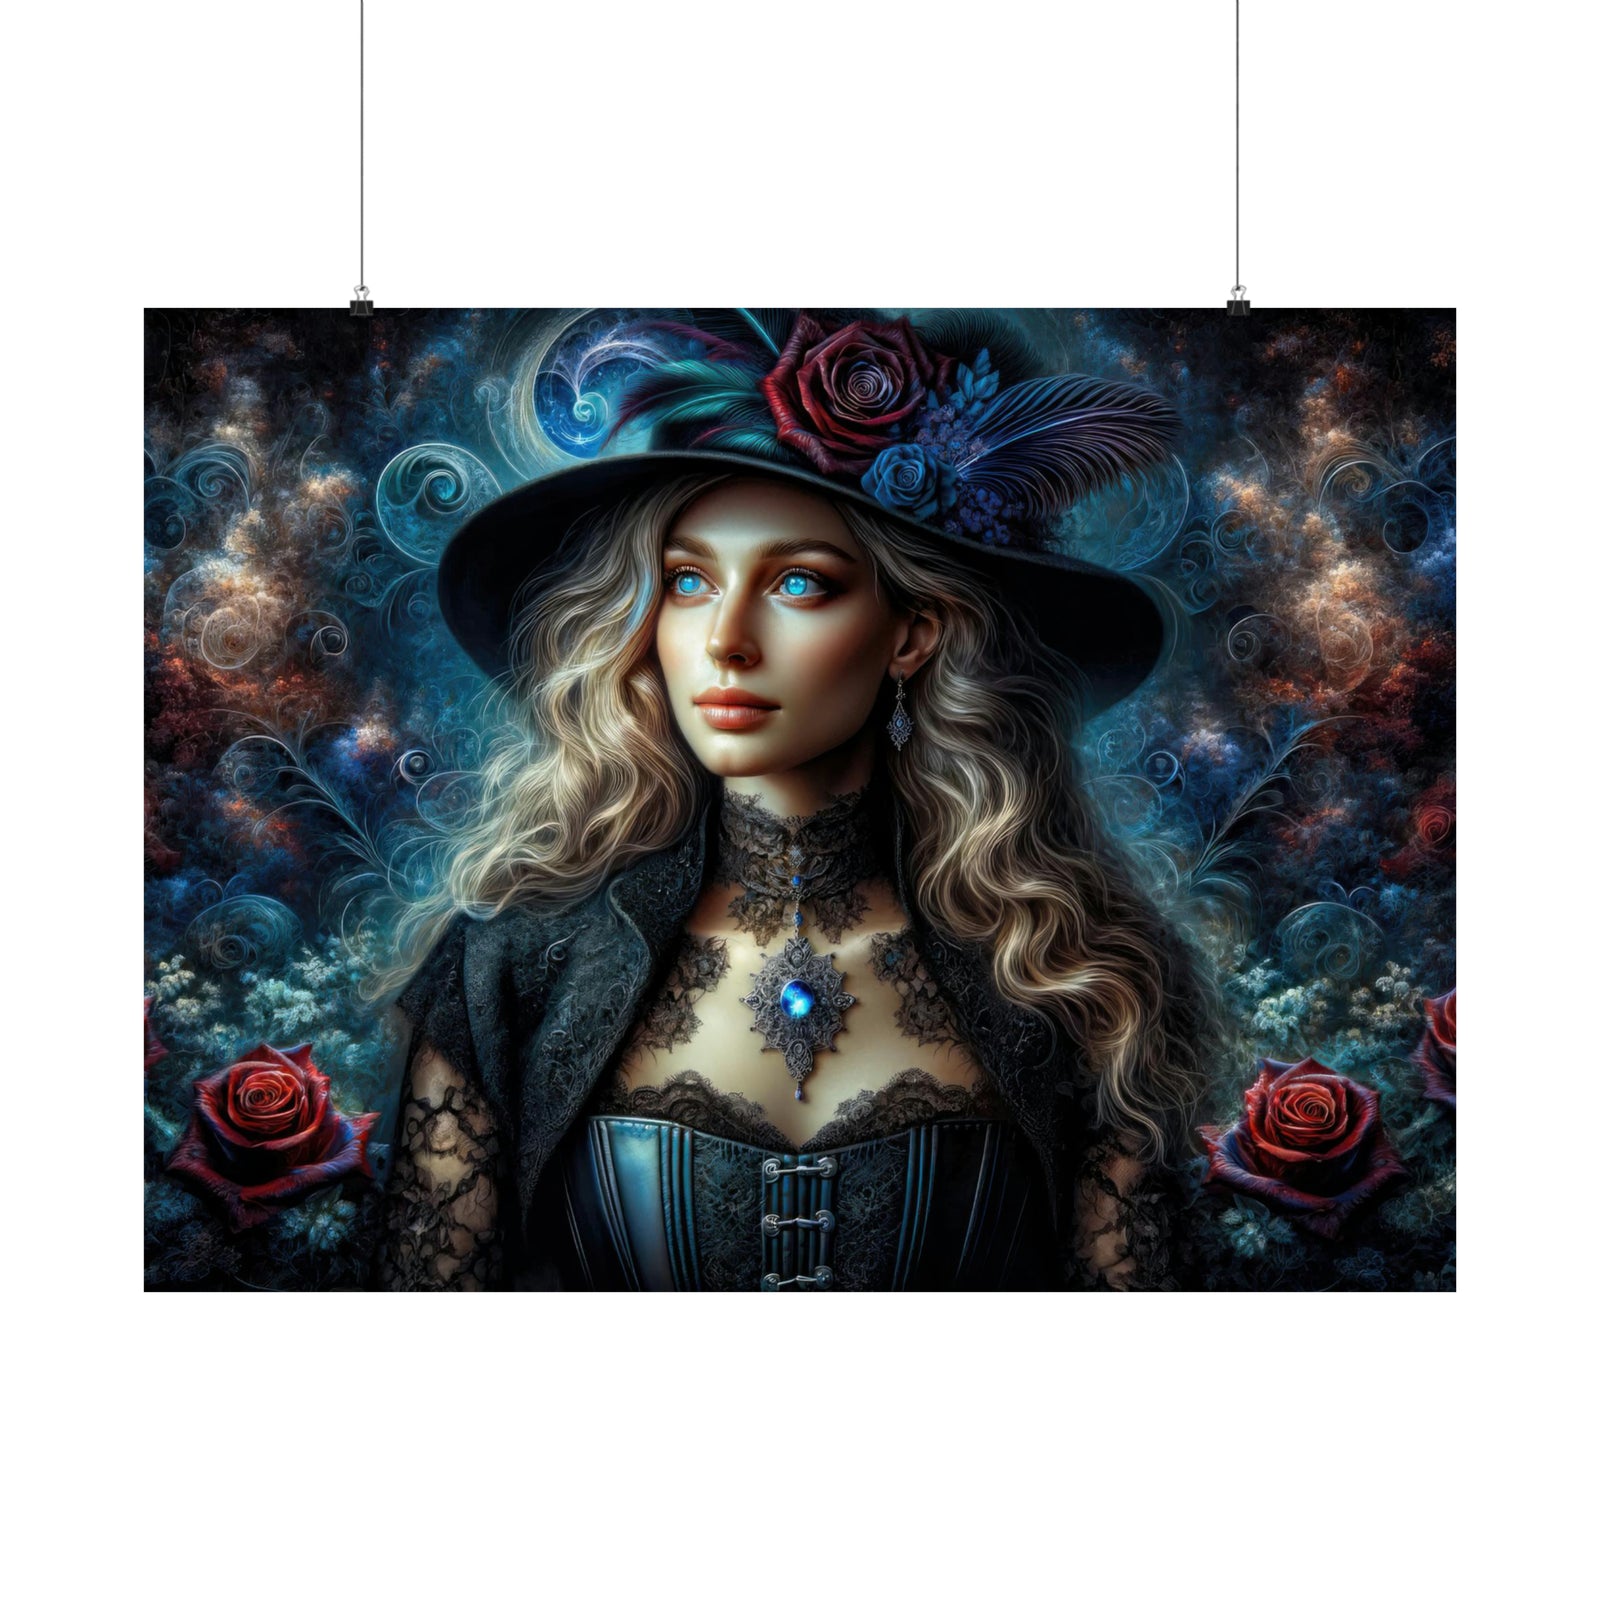 Dreams Woven in Moonlight and Roses Poster